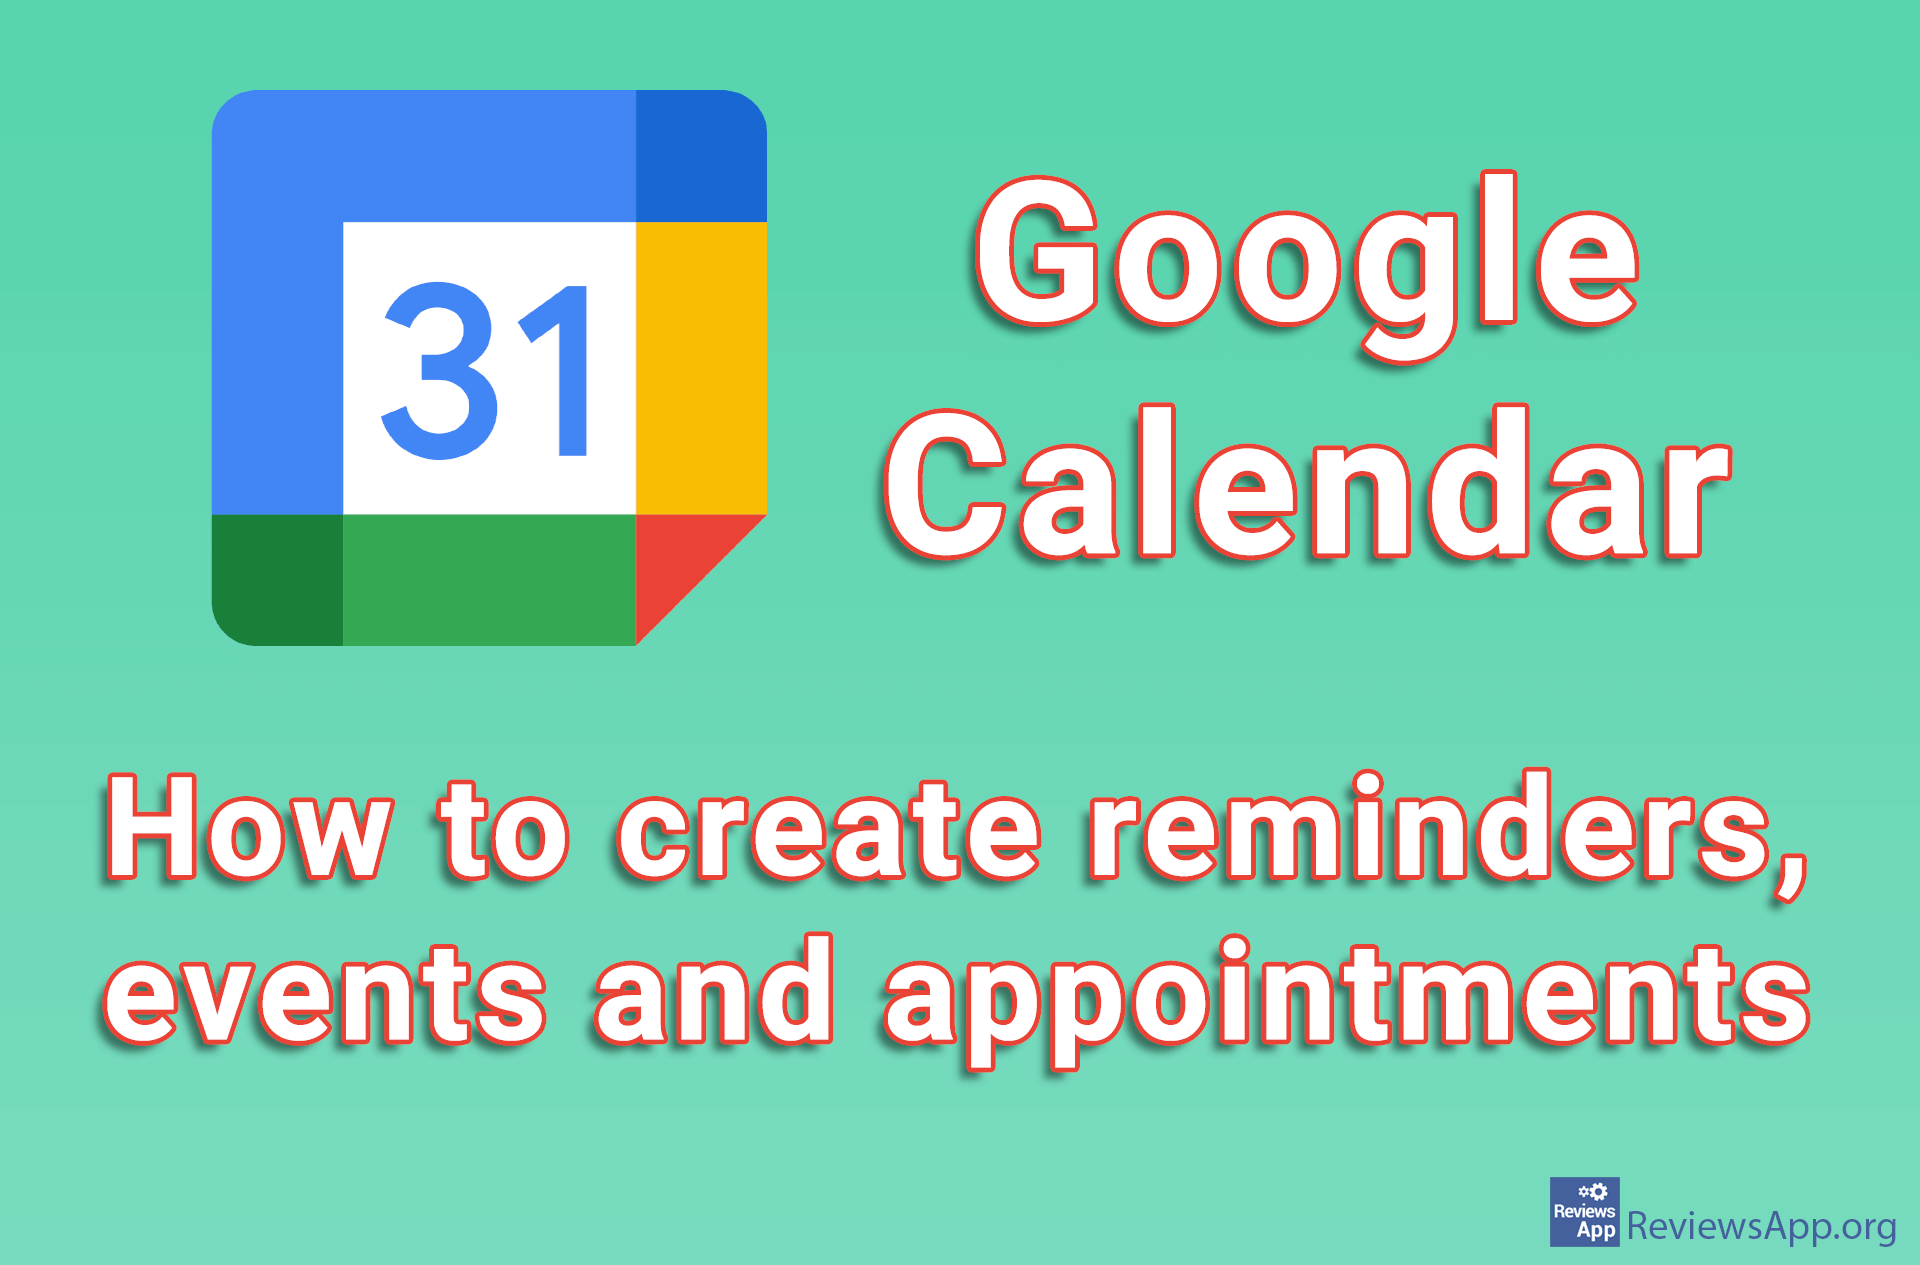 How to create reminders, events and appointments in Google Calendar